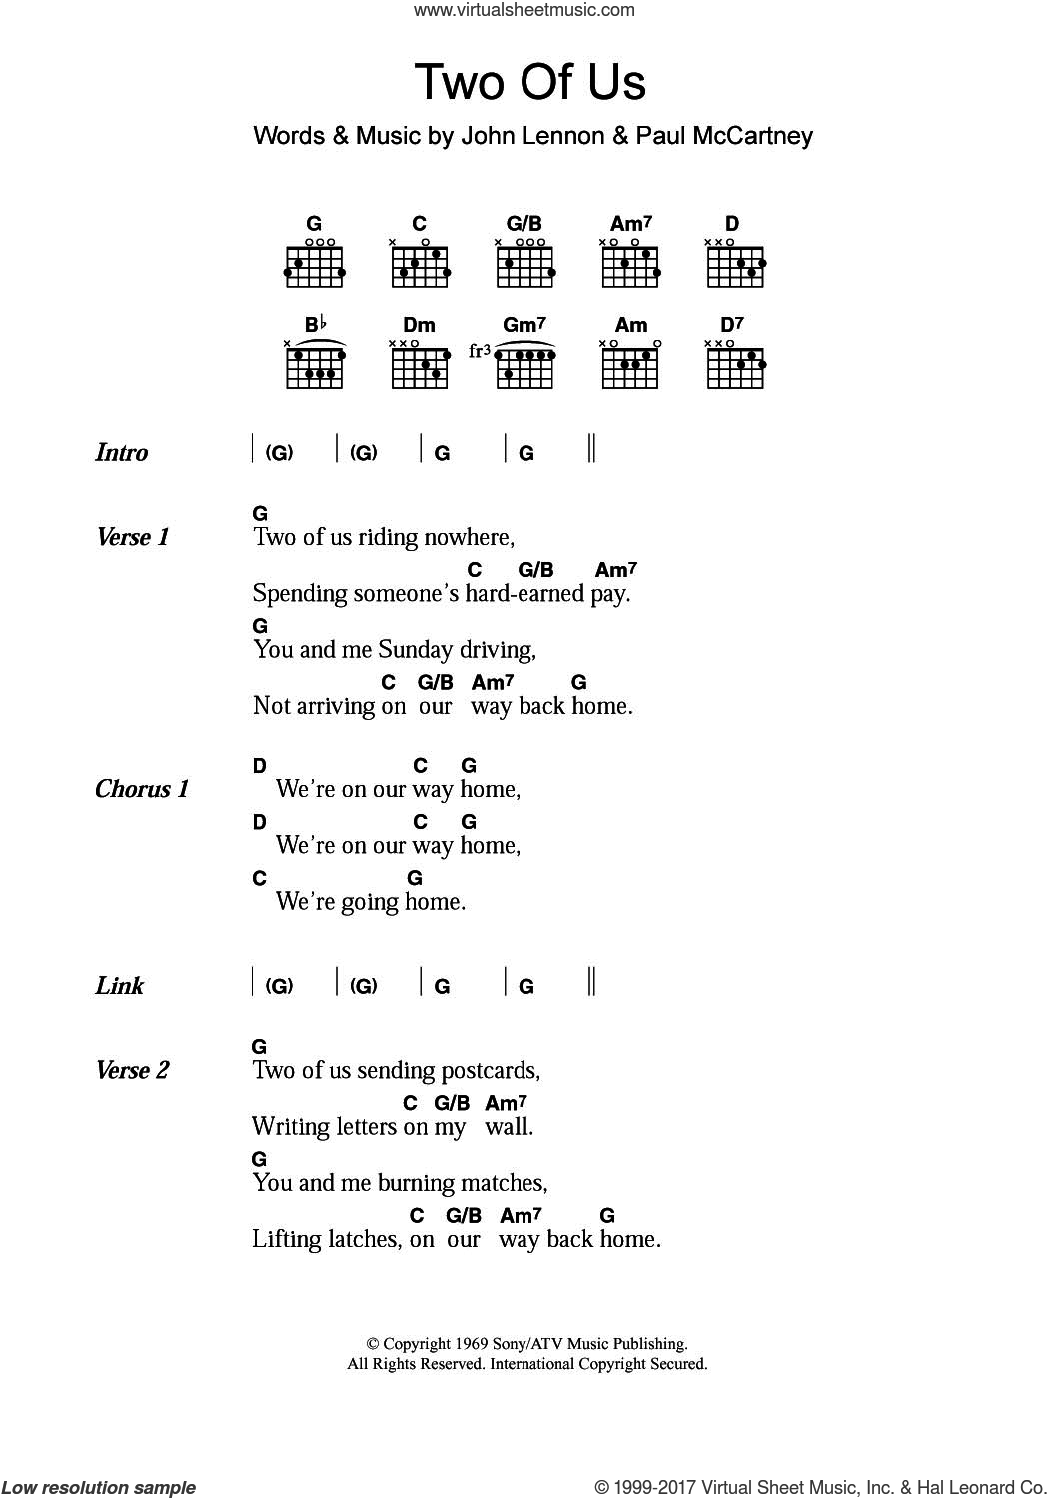 Two Of Us sheet music for guitar (chords) (PDF)